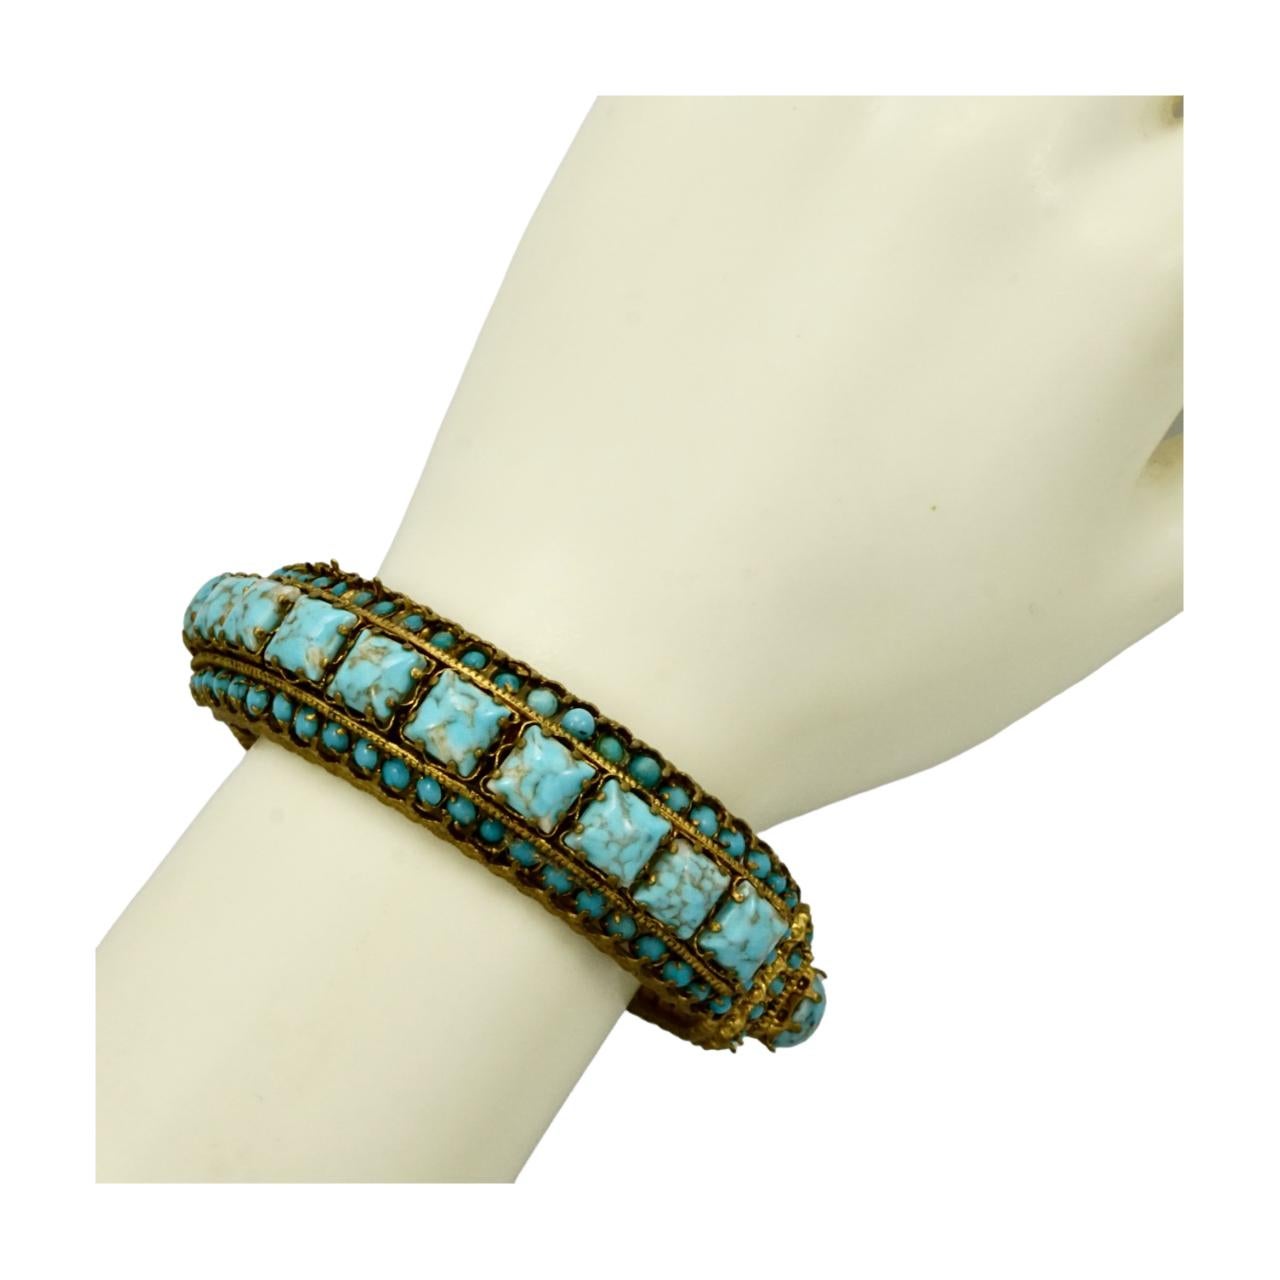 Gold Plated and Black Enamel Bangle Bracelet with Faux Turquoise Stones For Sale 3